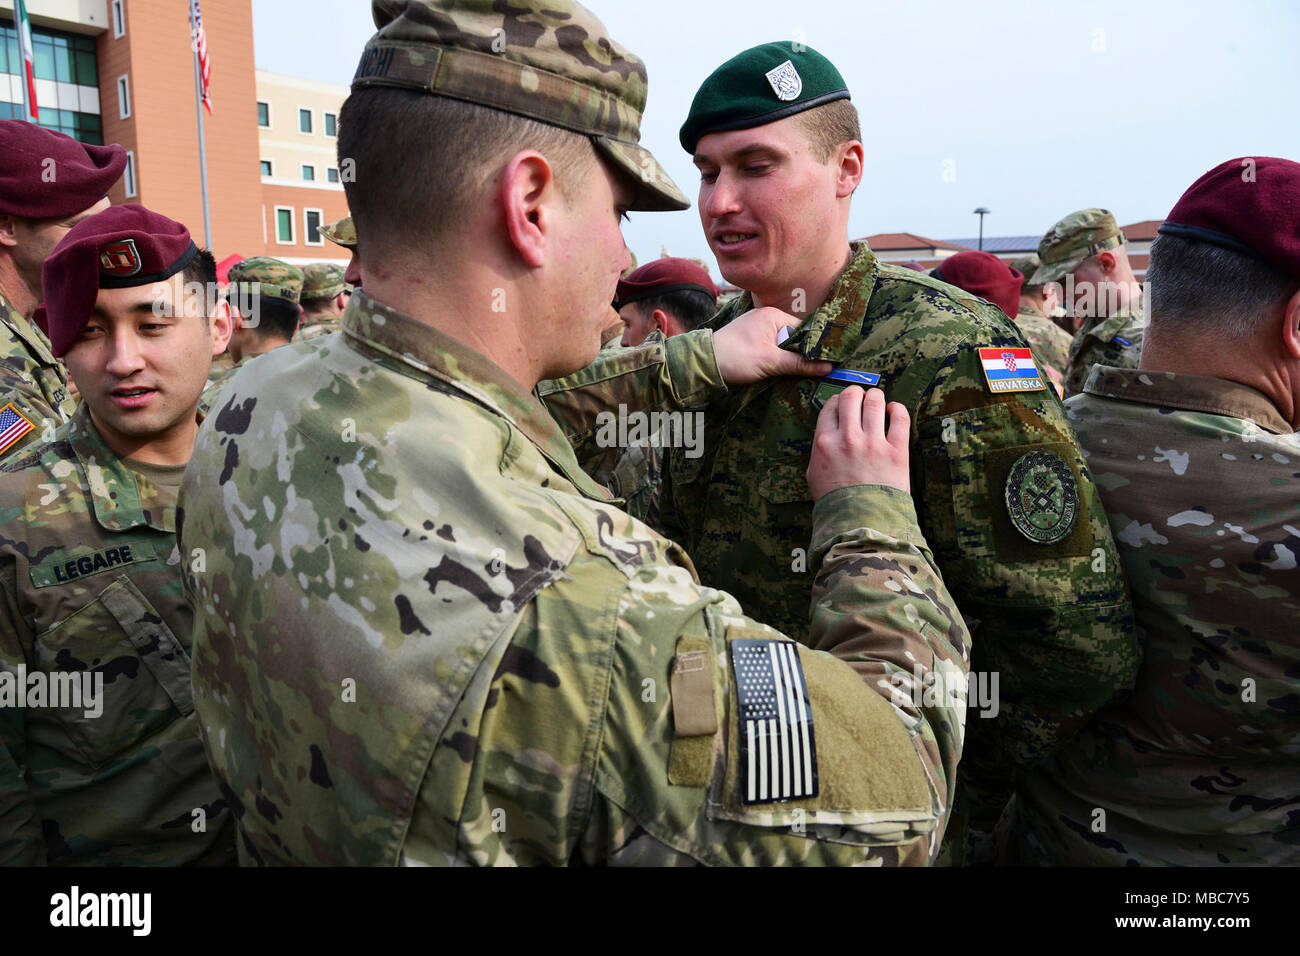 A U.S. Army Solder pins the Expert Infantryman Badge (EIB) on a Croatian Army Soldier during the EIB ceremony at Caserma Del Din, Vicenza, Italy, 15 Feb. 2018. (U.S. Army Stock Photo